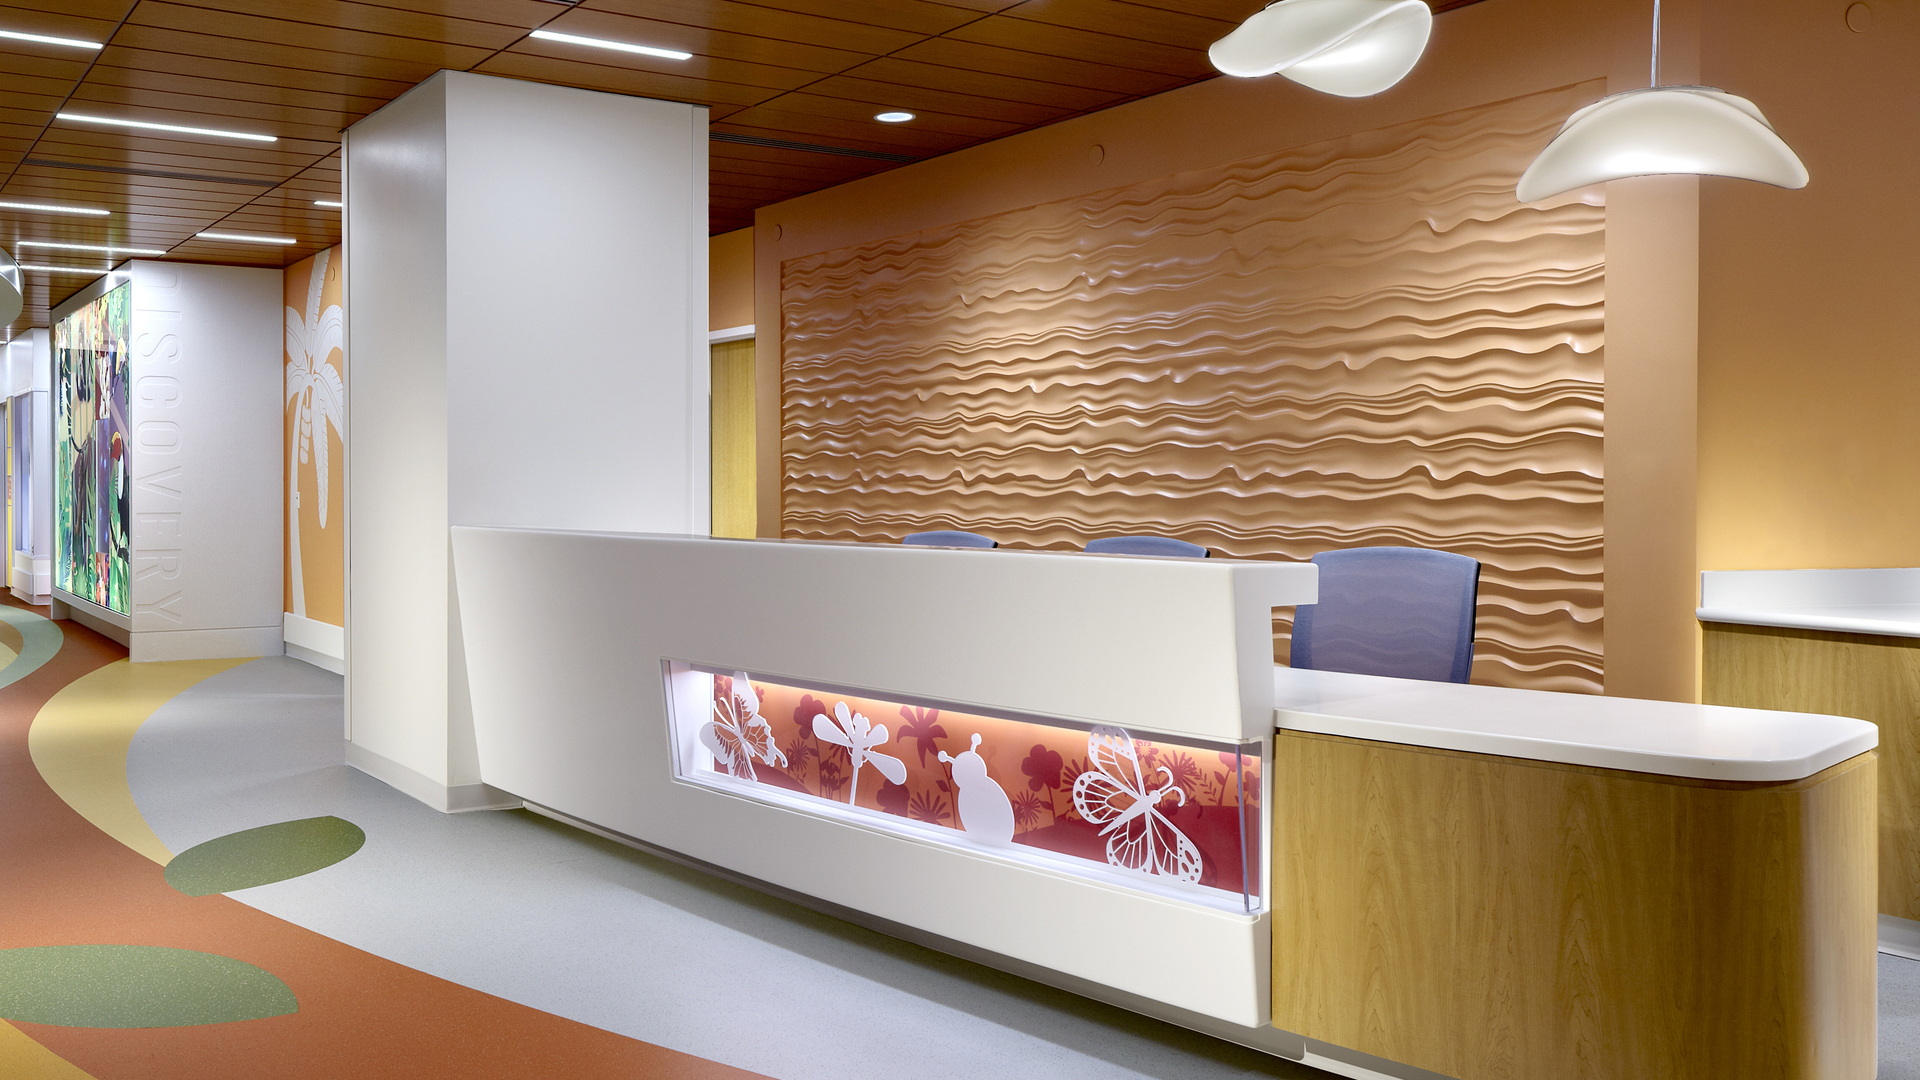 Reception desk with graphics